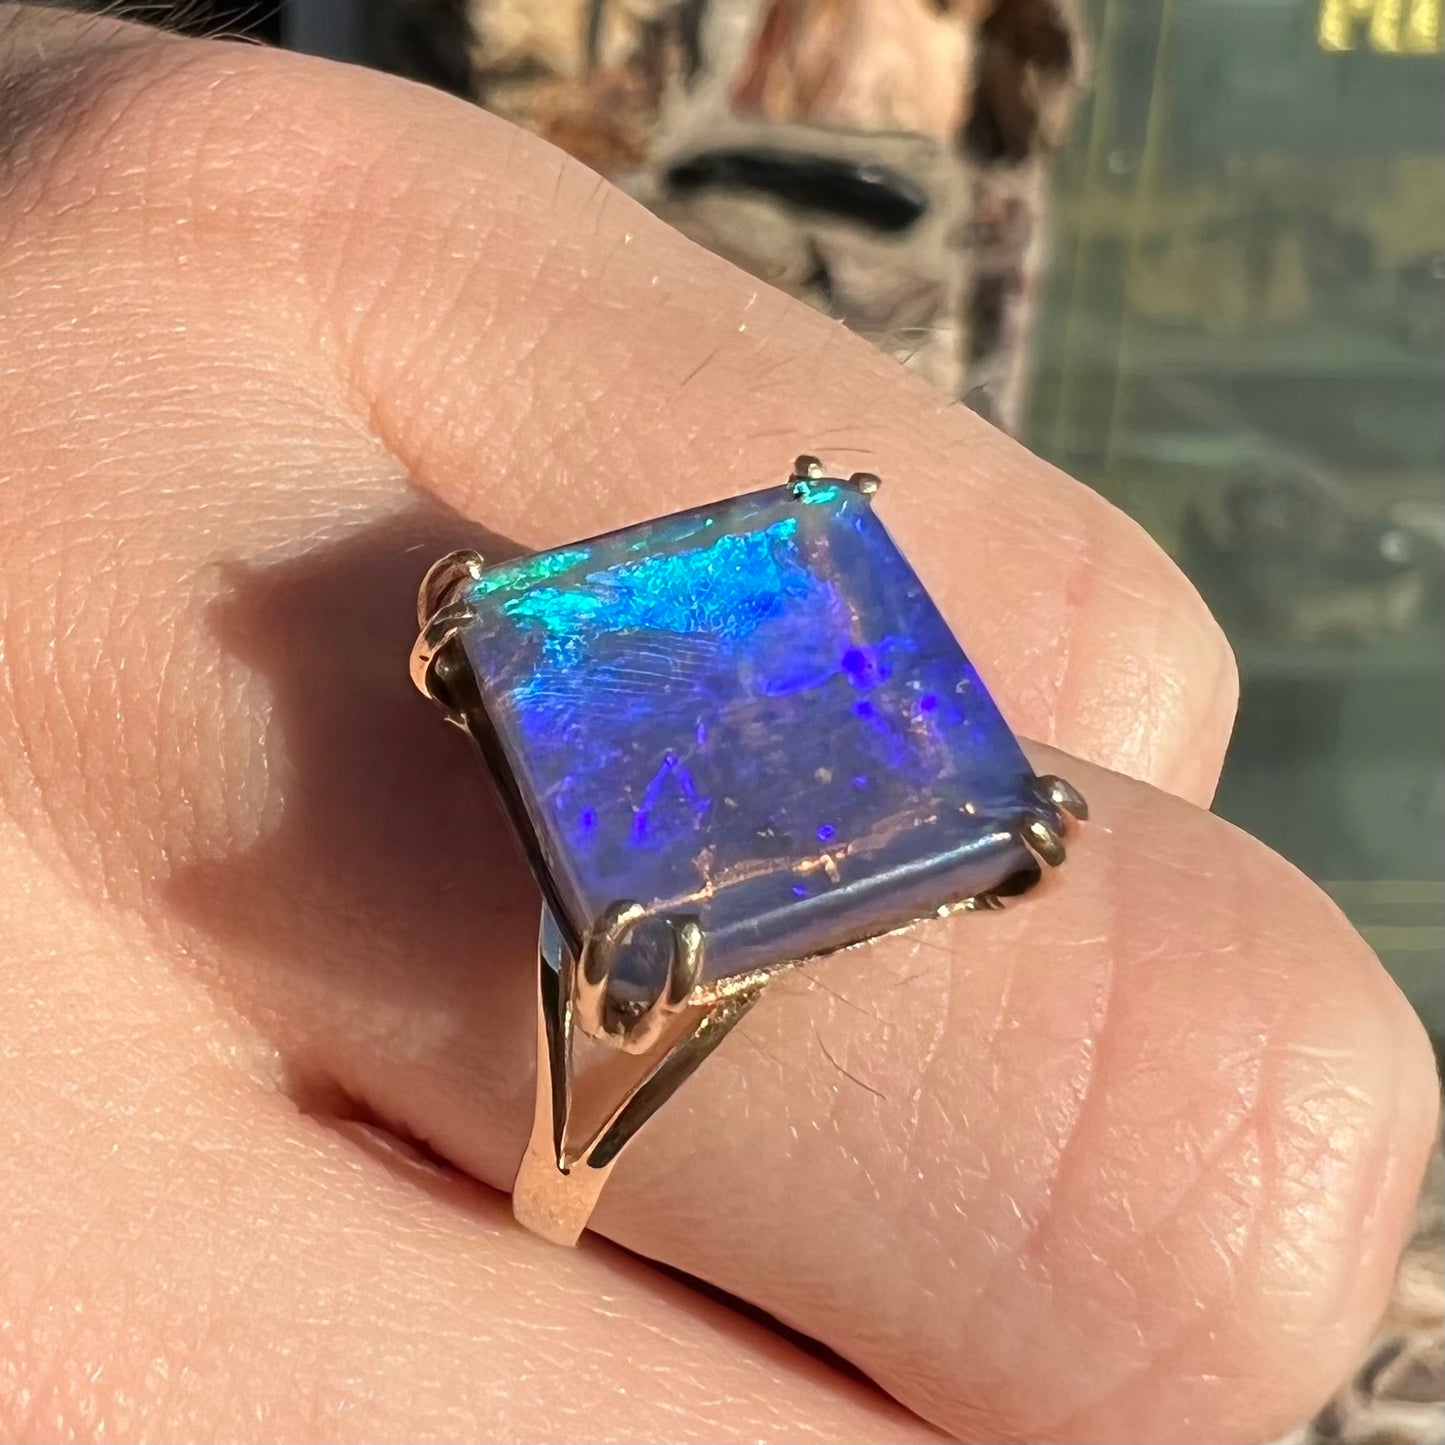 A ladies' boulder opal solitaire ring, handmade in yellow gold.  The stone is purple with flashes of blue, aqua, and green.